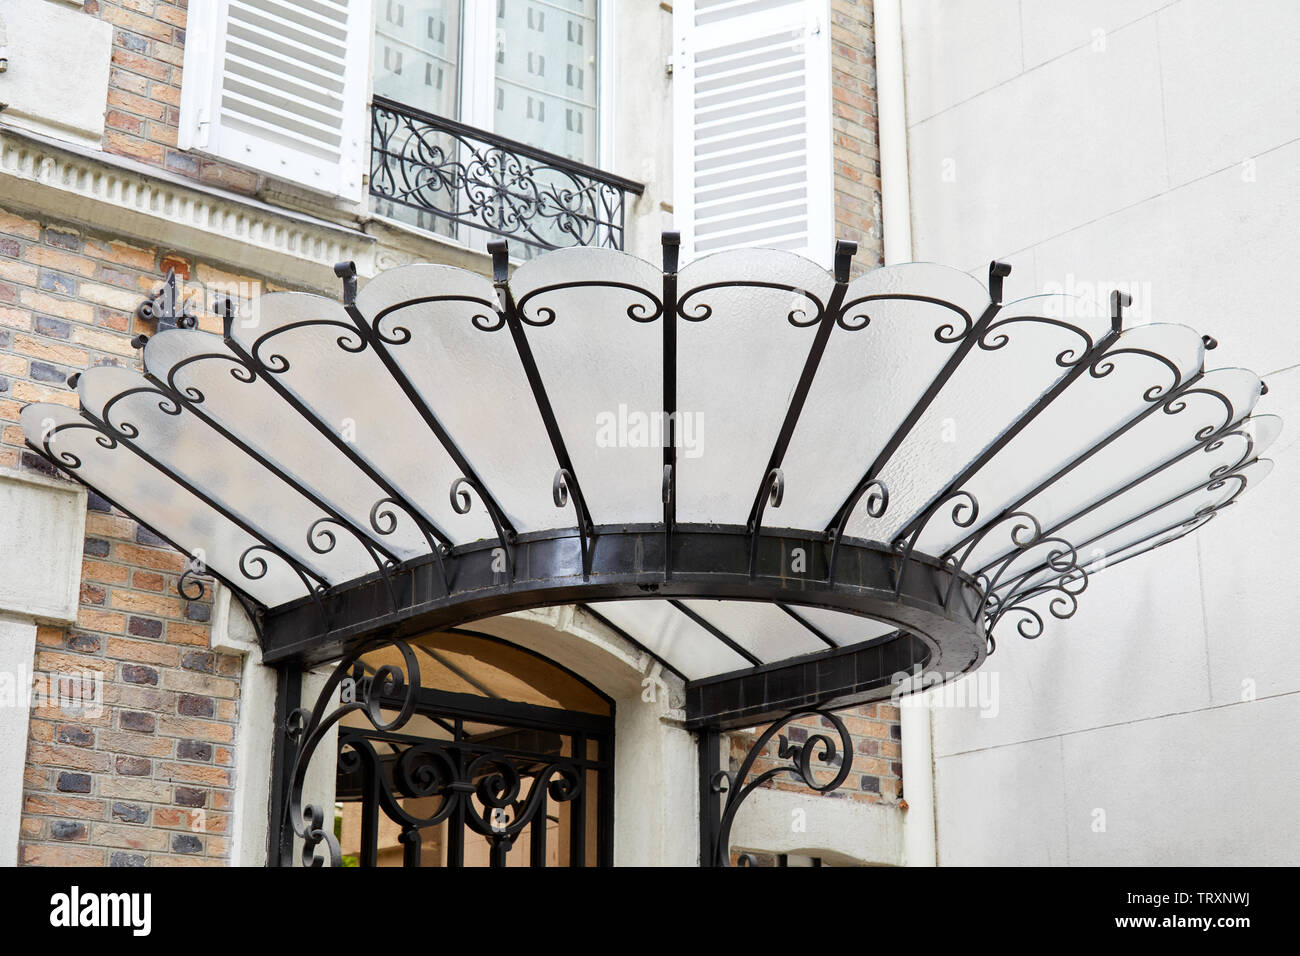 PARIS, FRANCE - JULY 23, 2017: Art Nouveau canopy in glass and black wrought iron in Paris, France Stock Photo